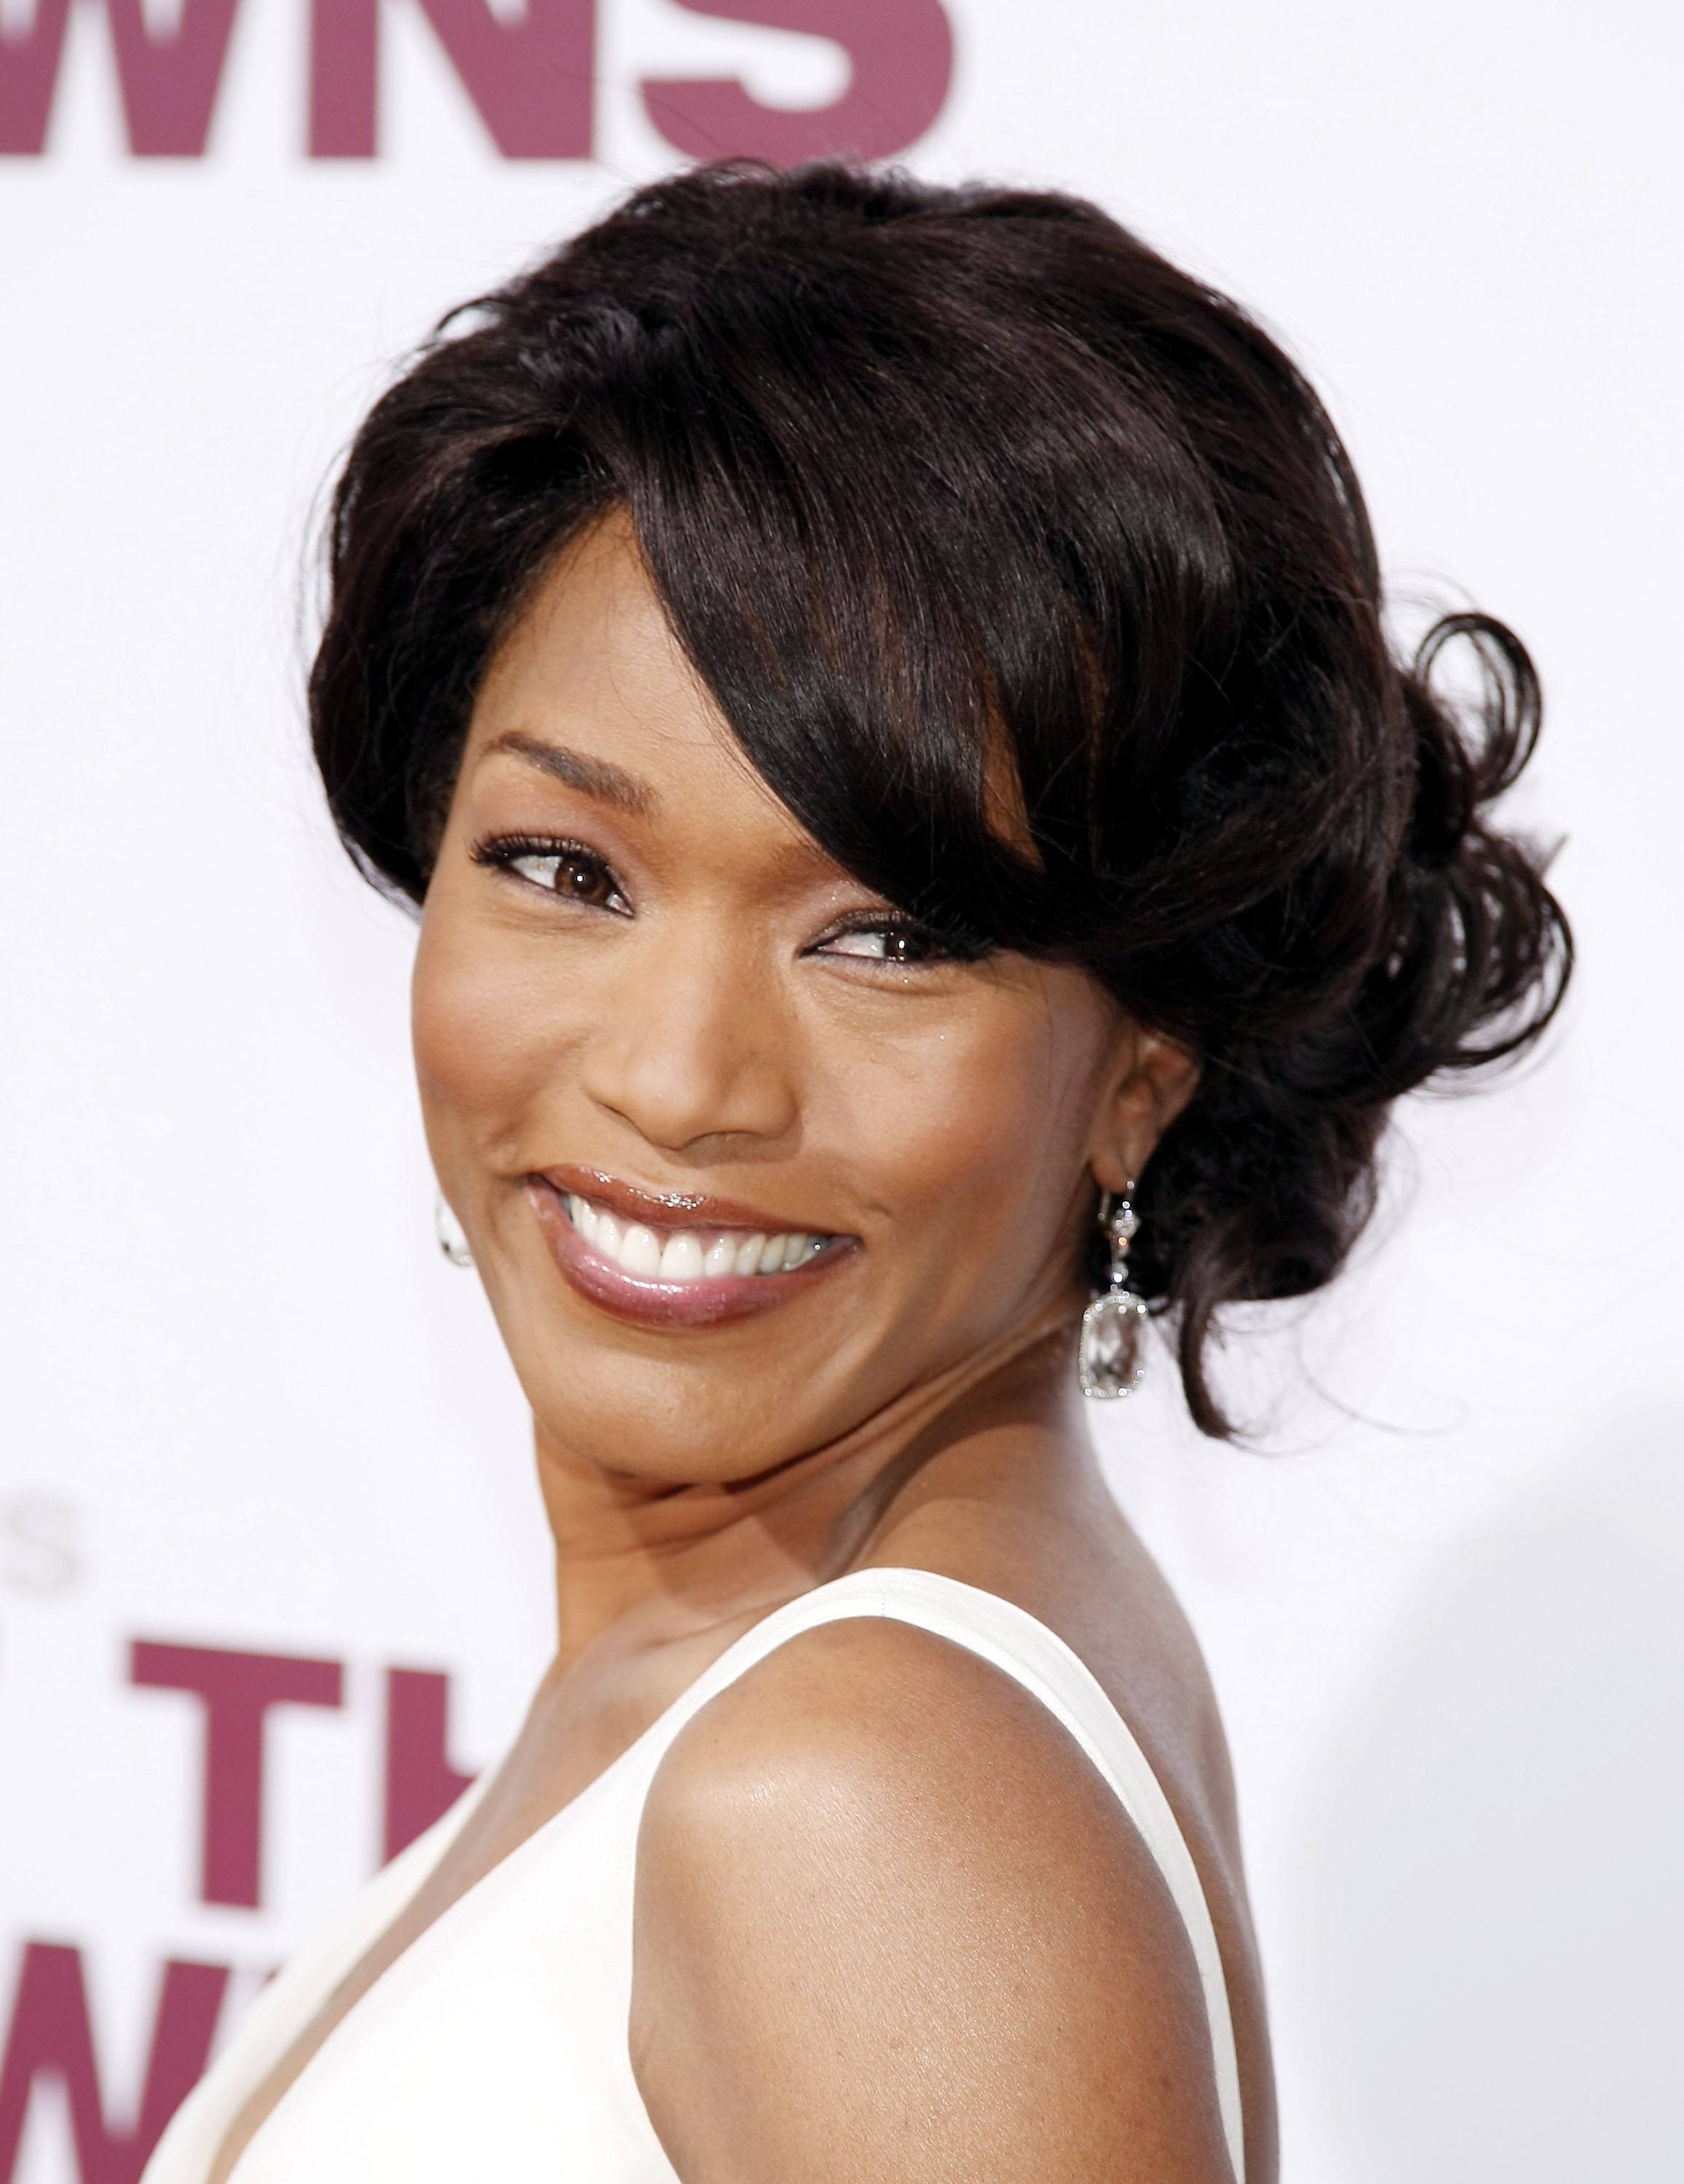 LOS ANGELES - MARCH 13:  Actress Angela Bassett arrives at the premiere of Lionsgate's "Tyler Perry's Meet The Browns" at the Cinerama Dome Theater on March 13, 2008 in Los Angeles, California. (Photo by Kevin Winter/Getty Images)